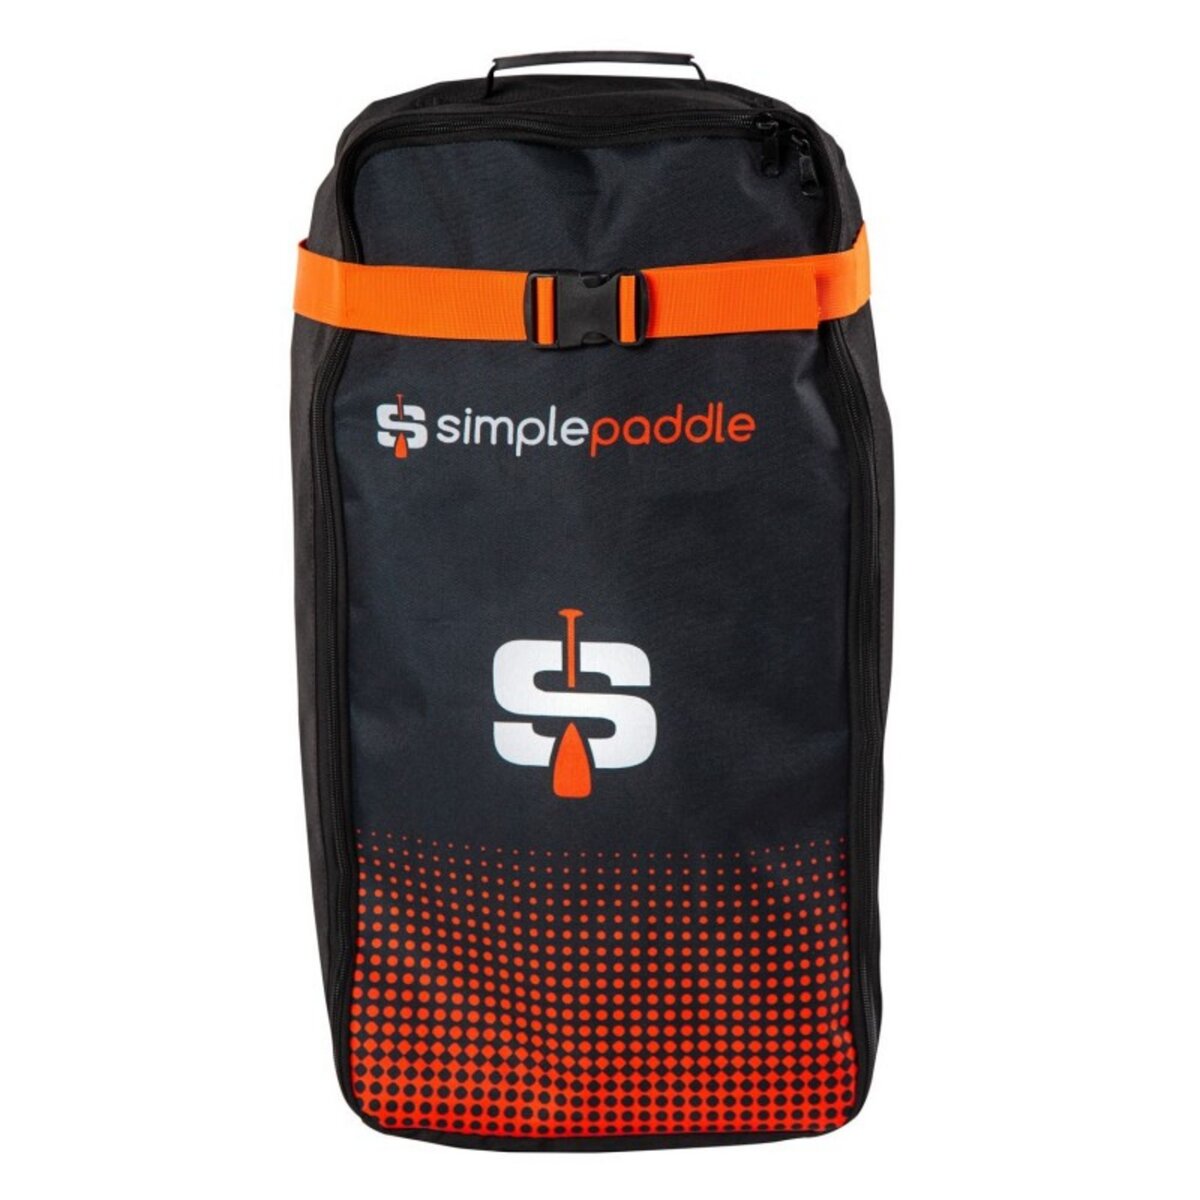 SIMPLE PADDLE Sac de Transport Simple Paddle pour Stand up Paddle gamme Compact- 65 x 35 x 25 cm